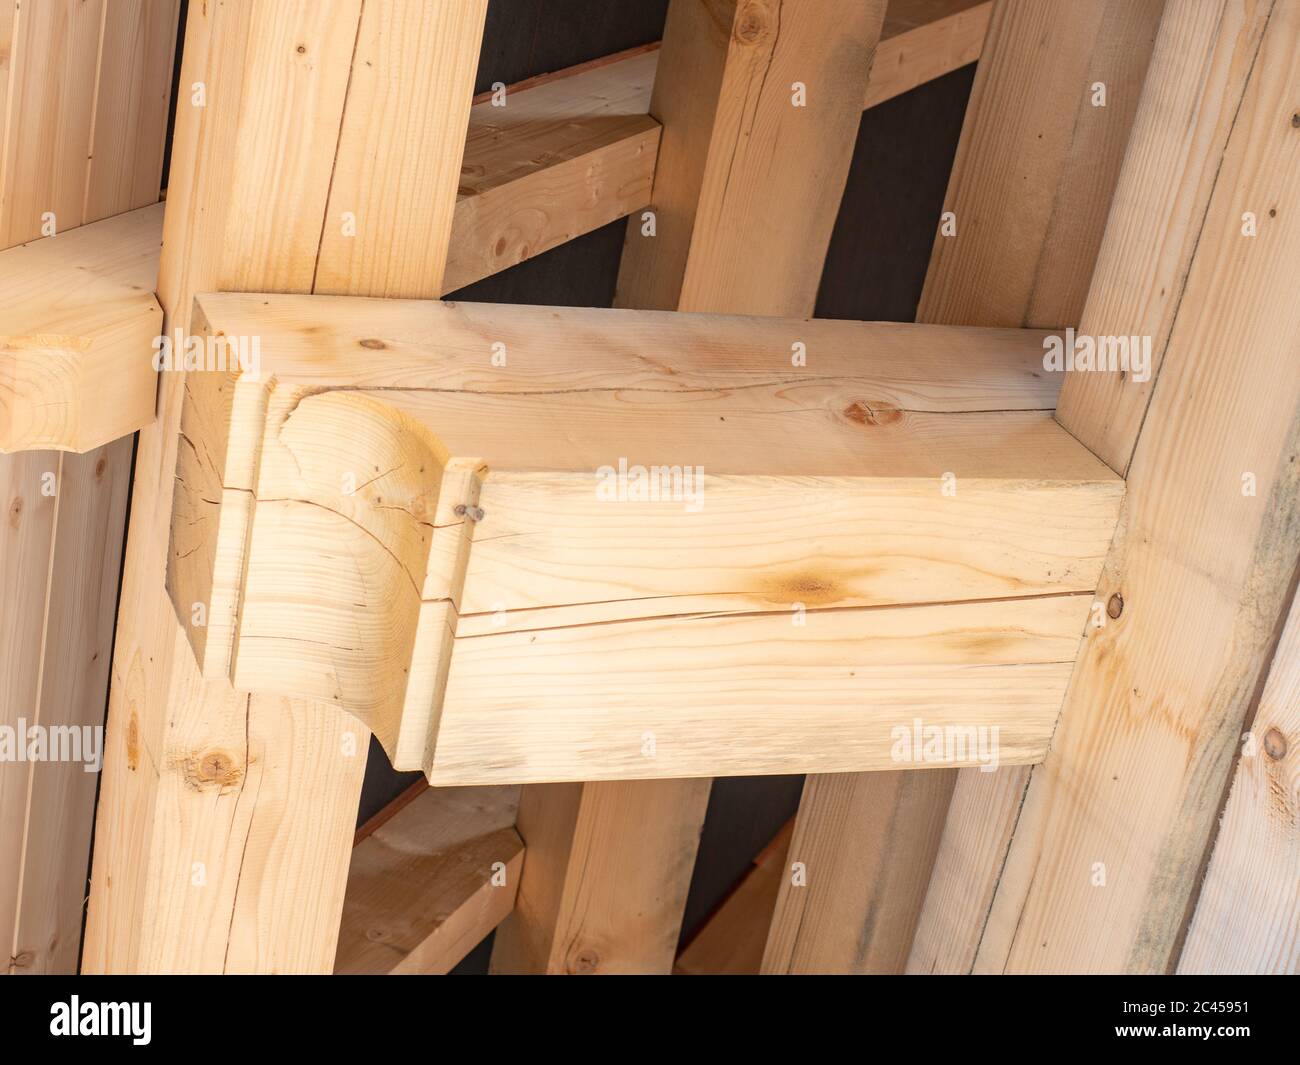 Roofing construction with wooden beams, low angle view. Big spruce logs, rafters, trusses. Stock Photo